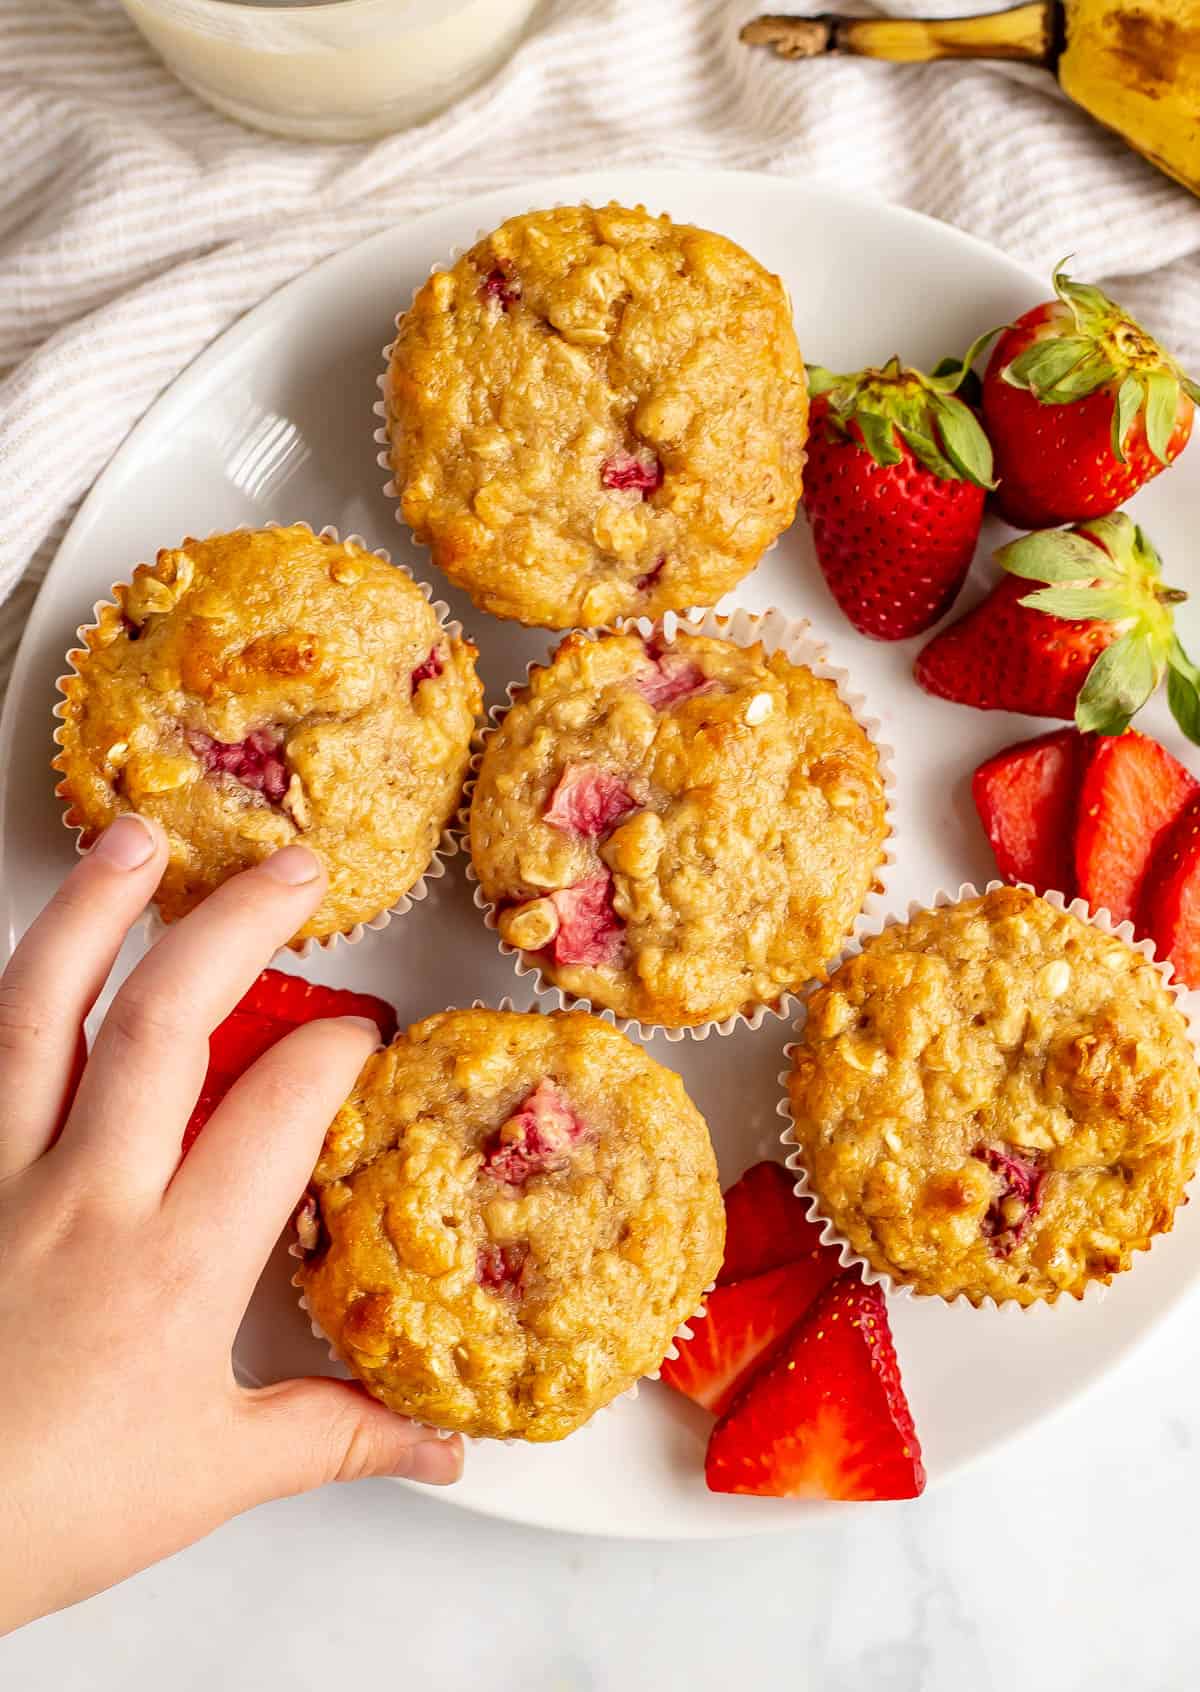 A hand reaching for a strawberry banana muffin on a white plate.